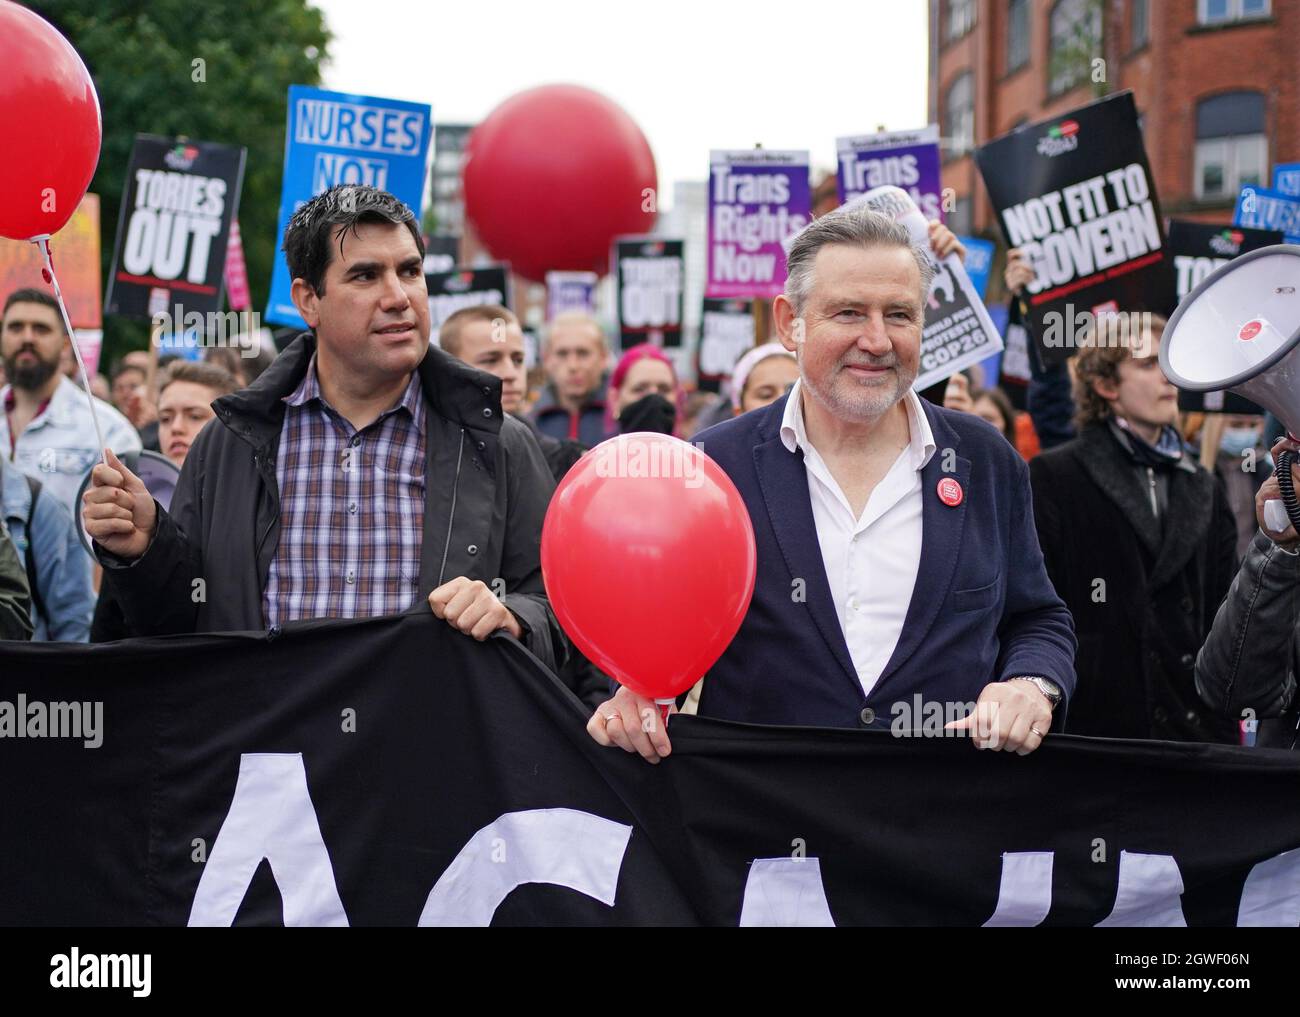 Labour MPs Richard Burgon (left) and Barry Gardiner take part in an anti  government protest in Manchester, during the Conservative party's annual  conference being held at the Manchester Central Convention Complex. Picture